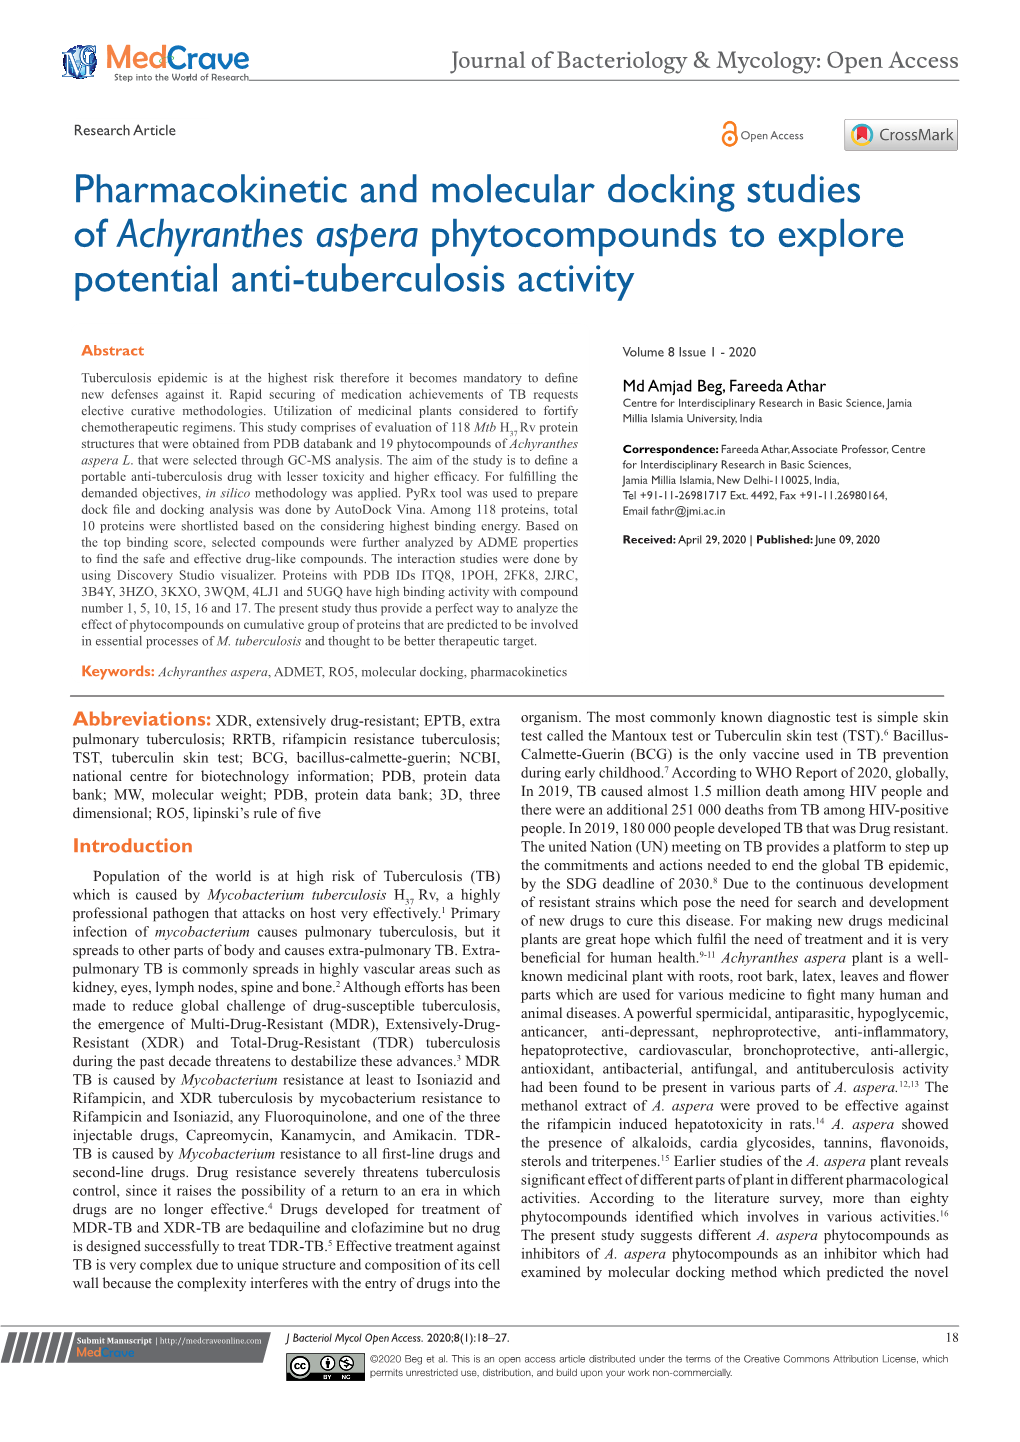 Pharmacokinetic and Molecular Docking Studies of Achyranthes Aspera Phytocompounds to Explore Potential Anti-Tuberculosis Activity